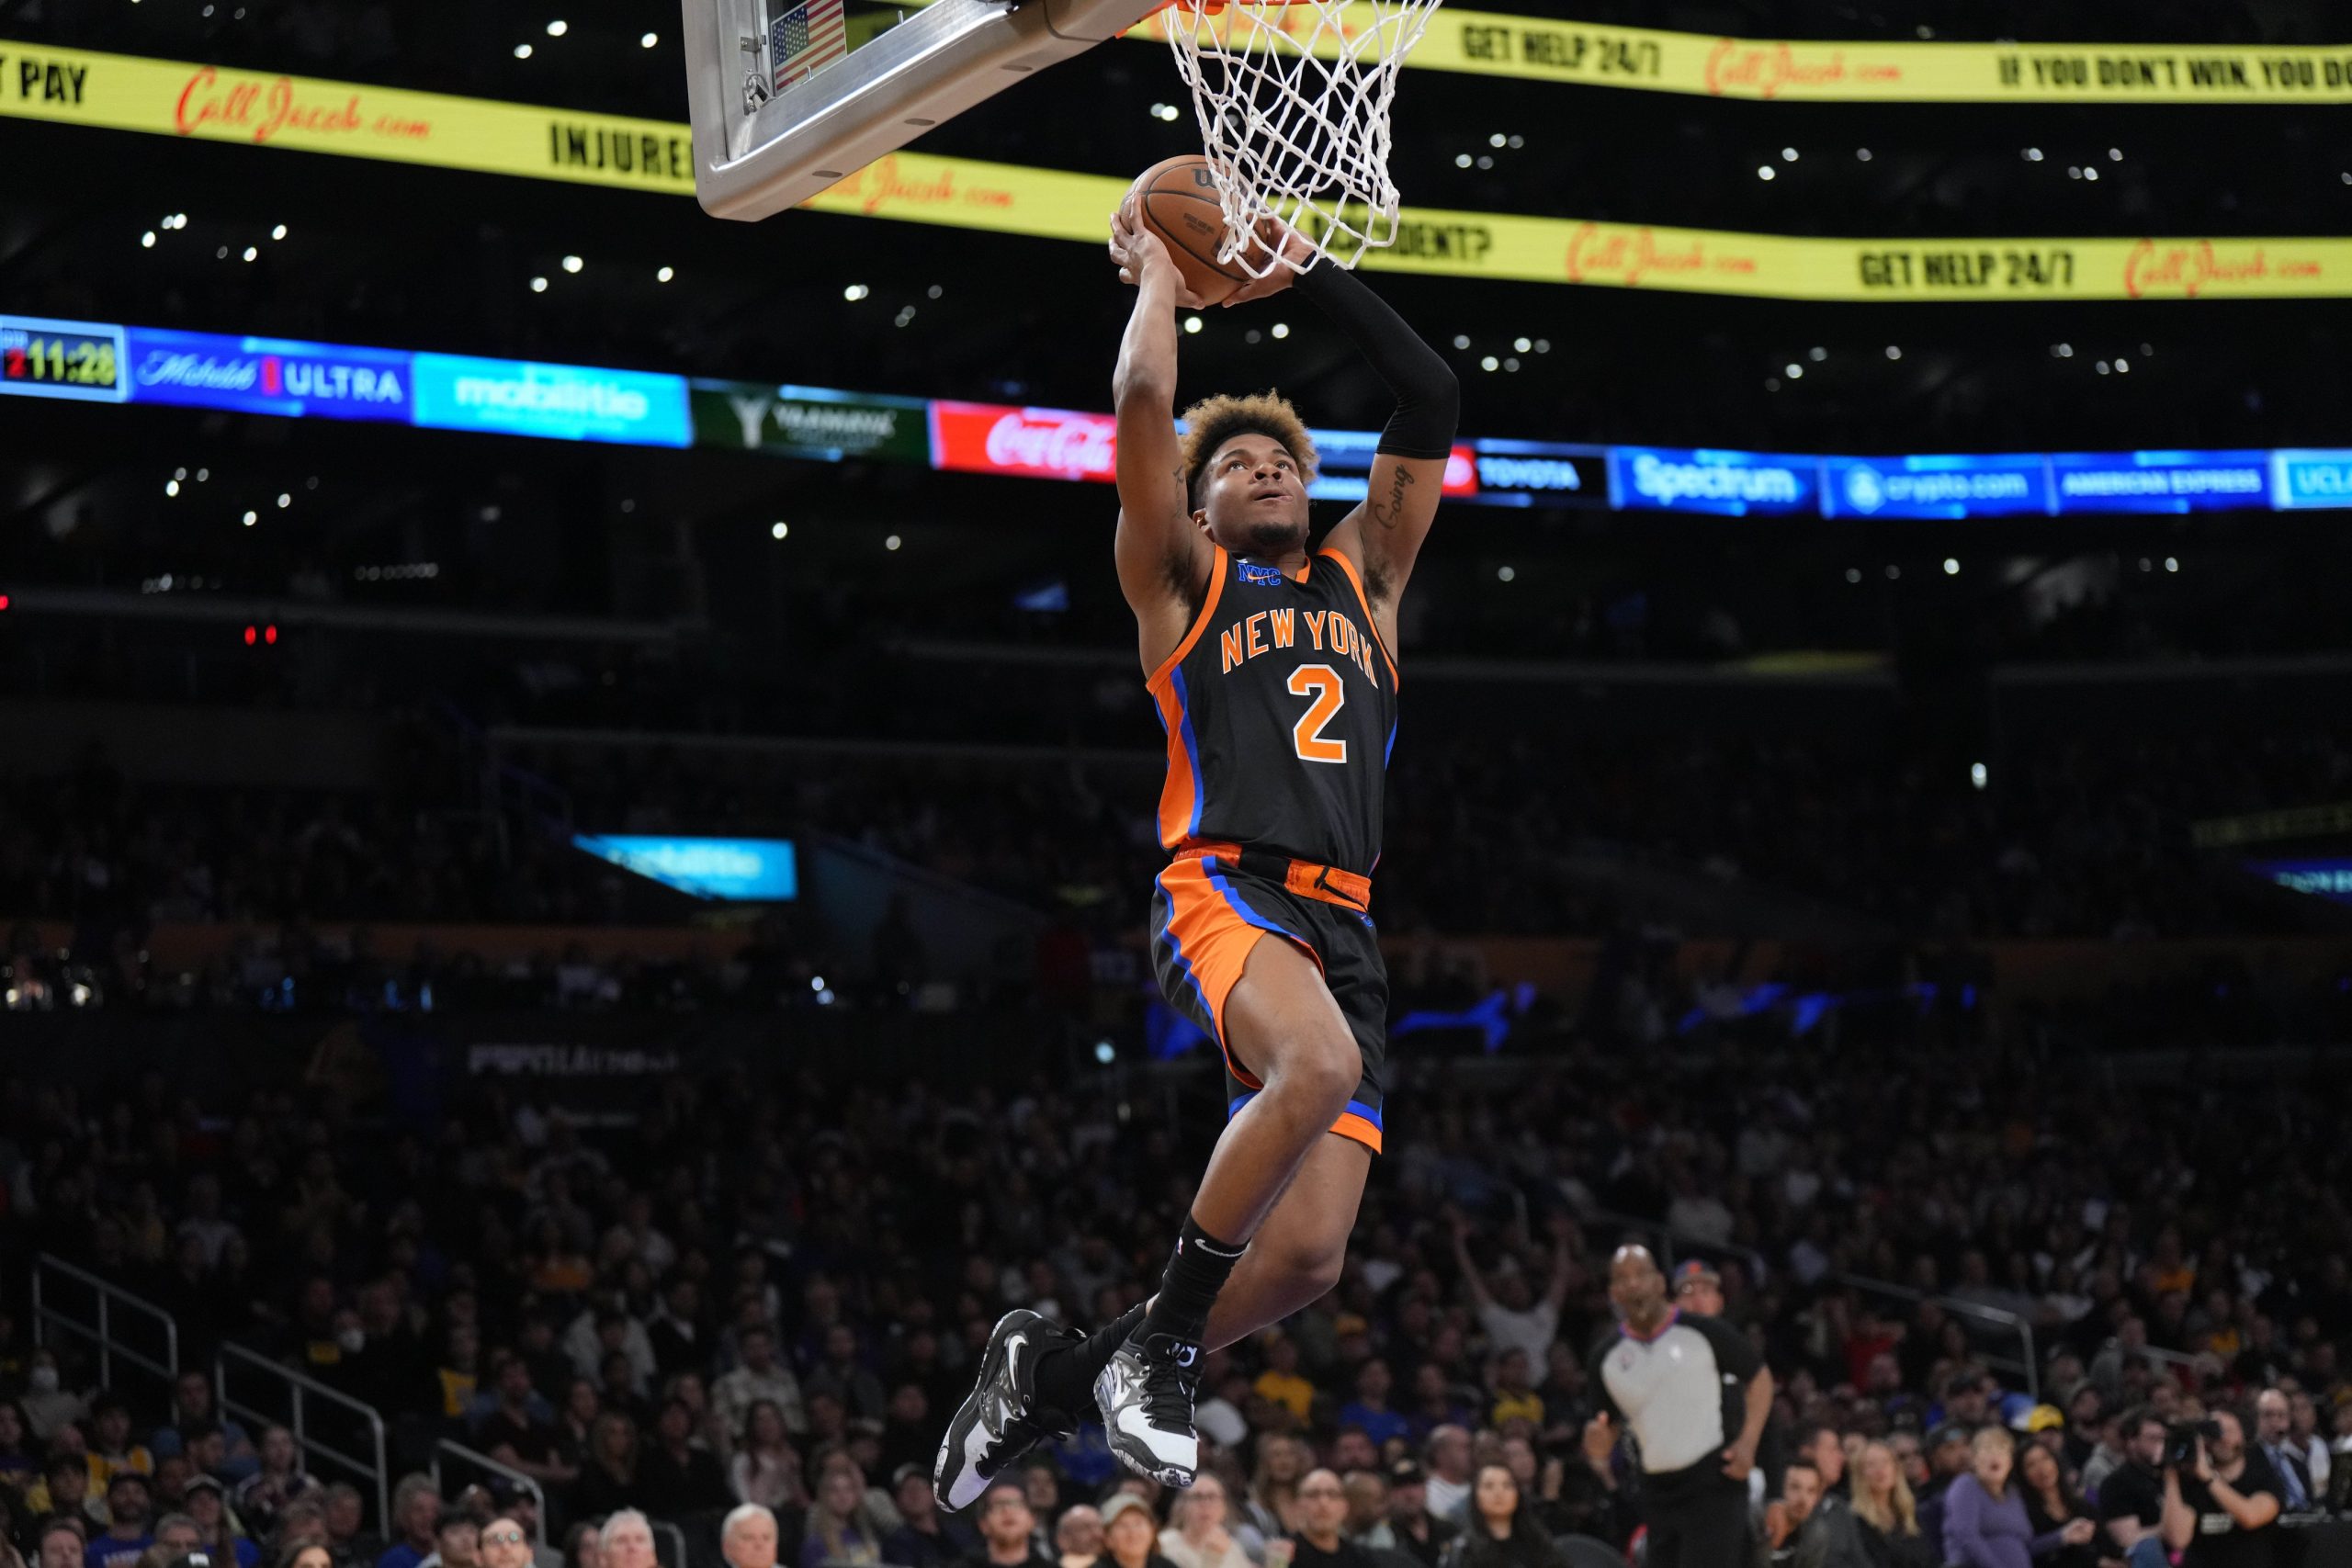 Mar 12, 2023; Los Angeles, California, USA; New York Knicks guard Miles McBride (2) dunks the ball against the Los Angeles Lakers in the first half at Crypto.com Arena. Mandatory Credit: Kirby Lee-USA TODAY Sports